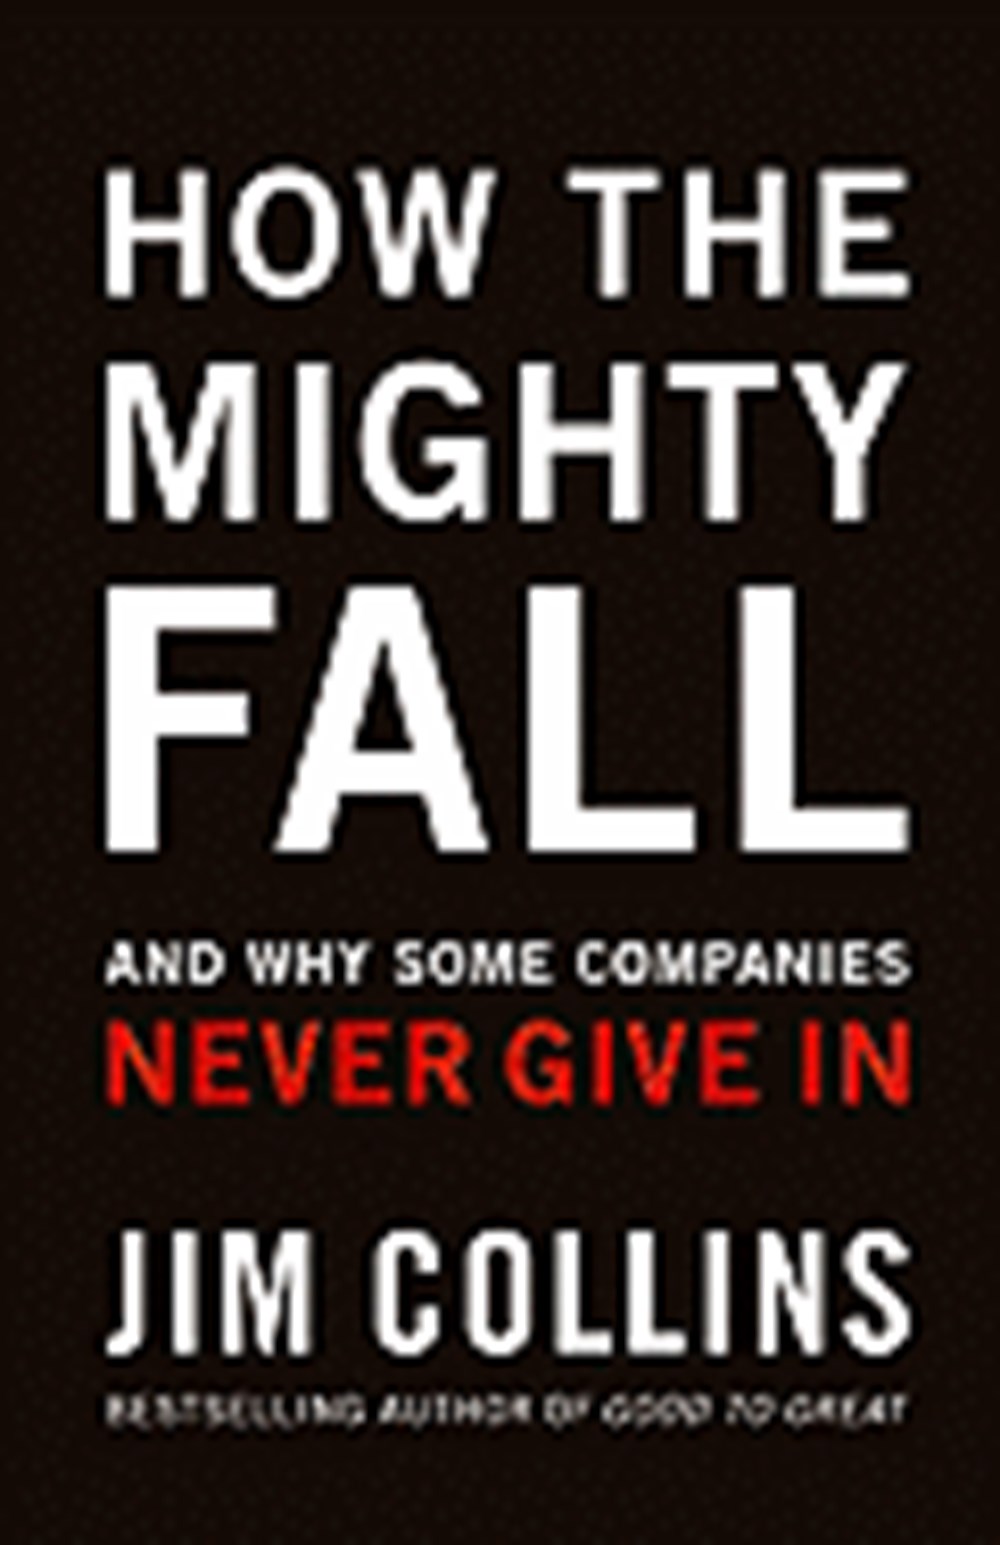 How the Mighty Fall And Why Some Companies Never Give in